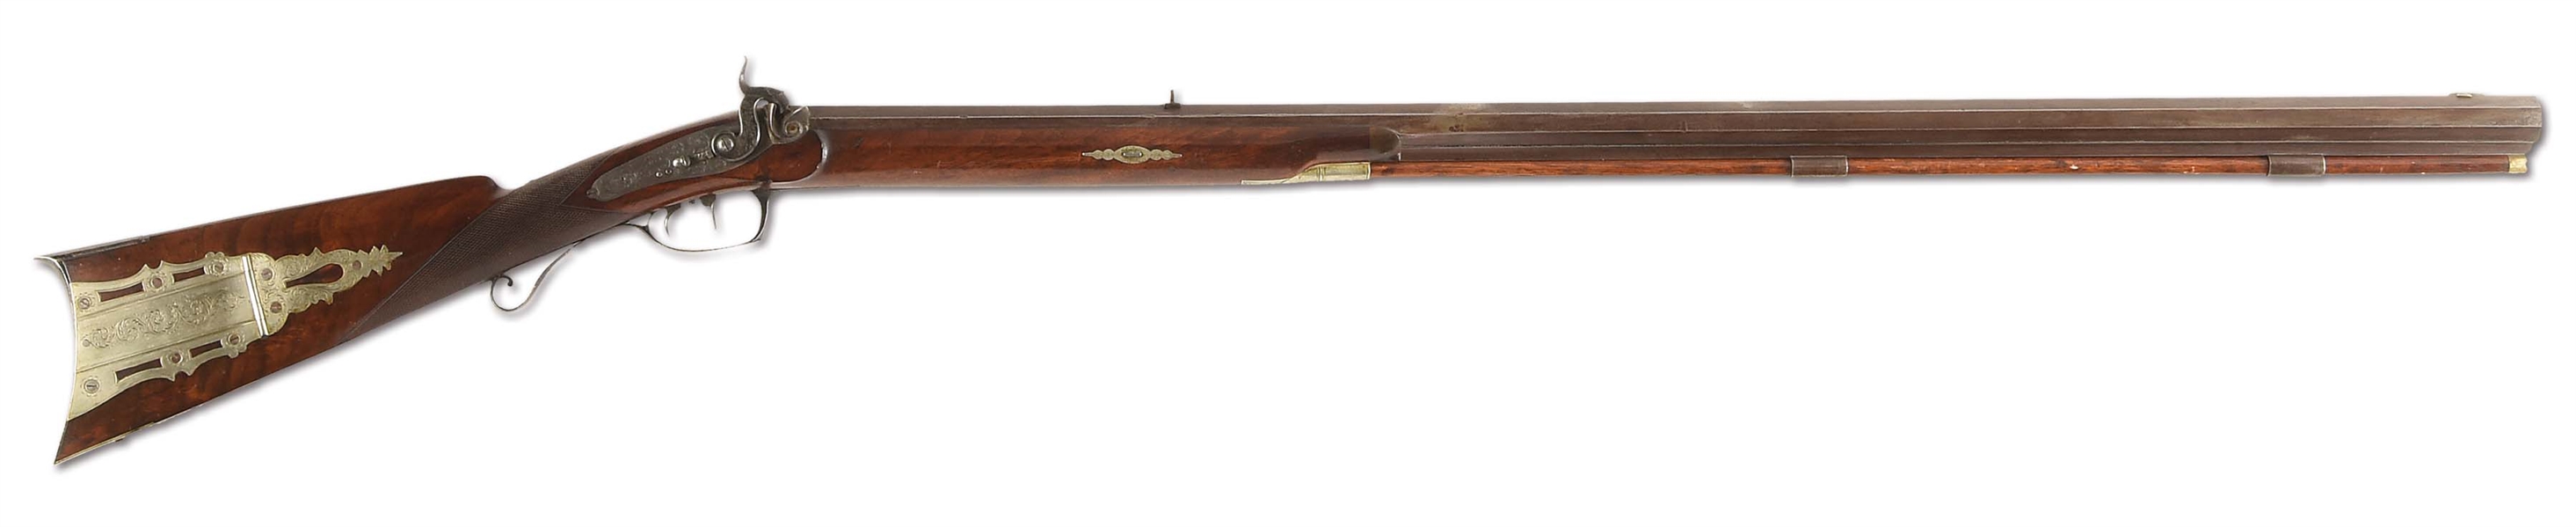 (A) WILLIAM CONSTABLE PHILADELPHIA SILVER MOUNTED HALF-STOCK SPORTING RIFLE.